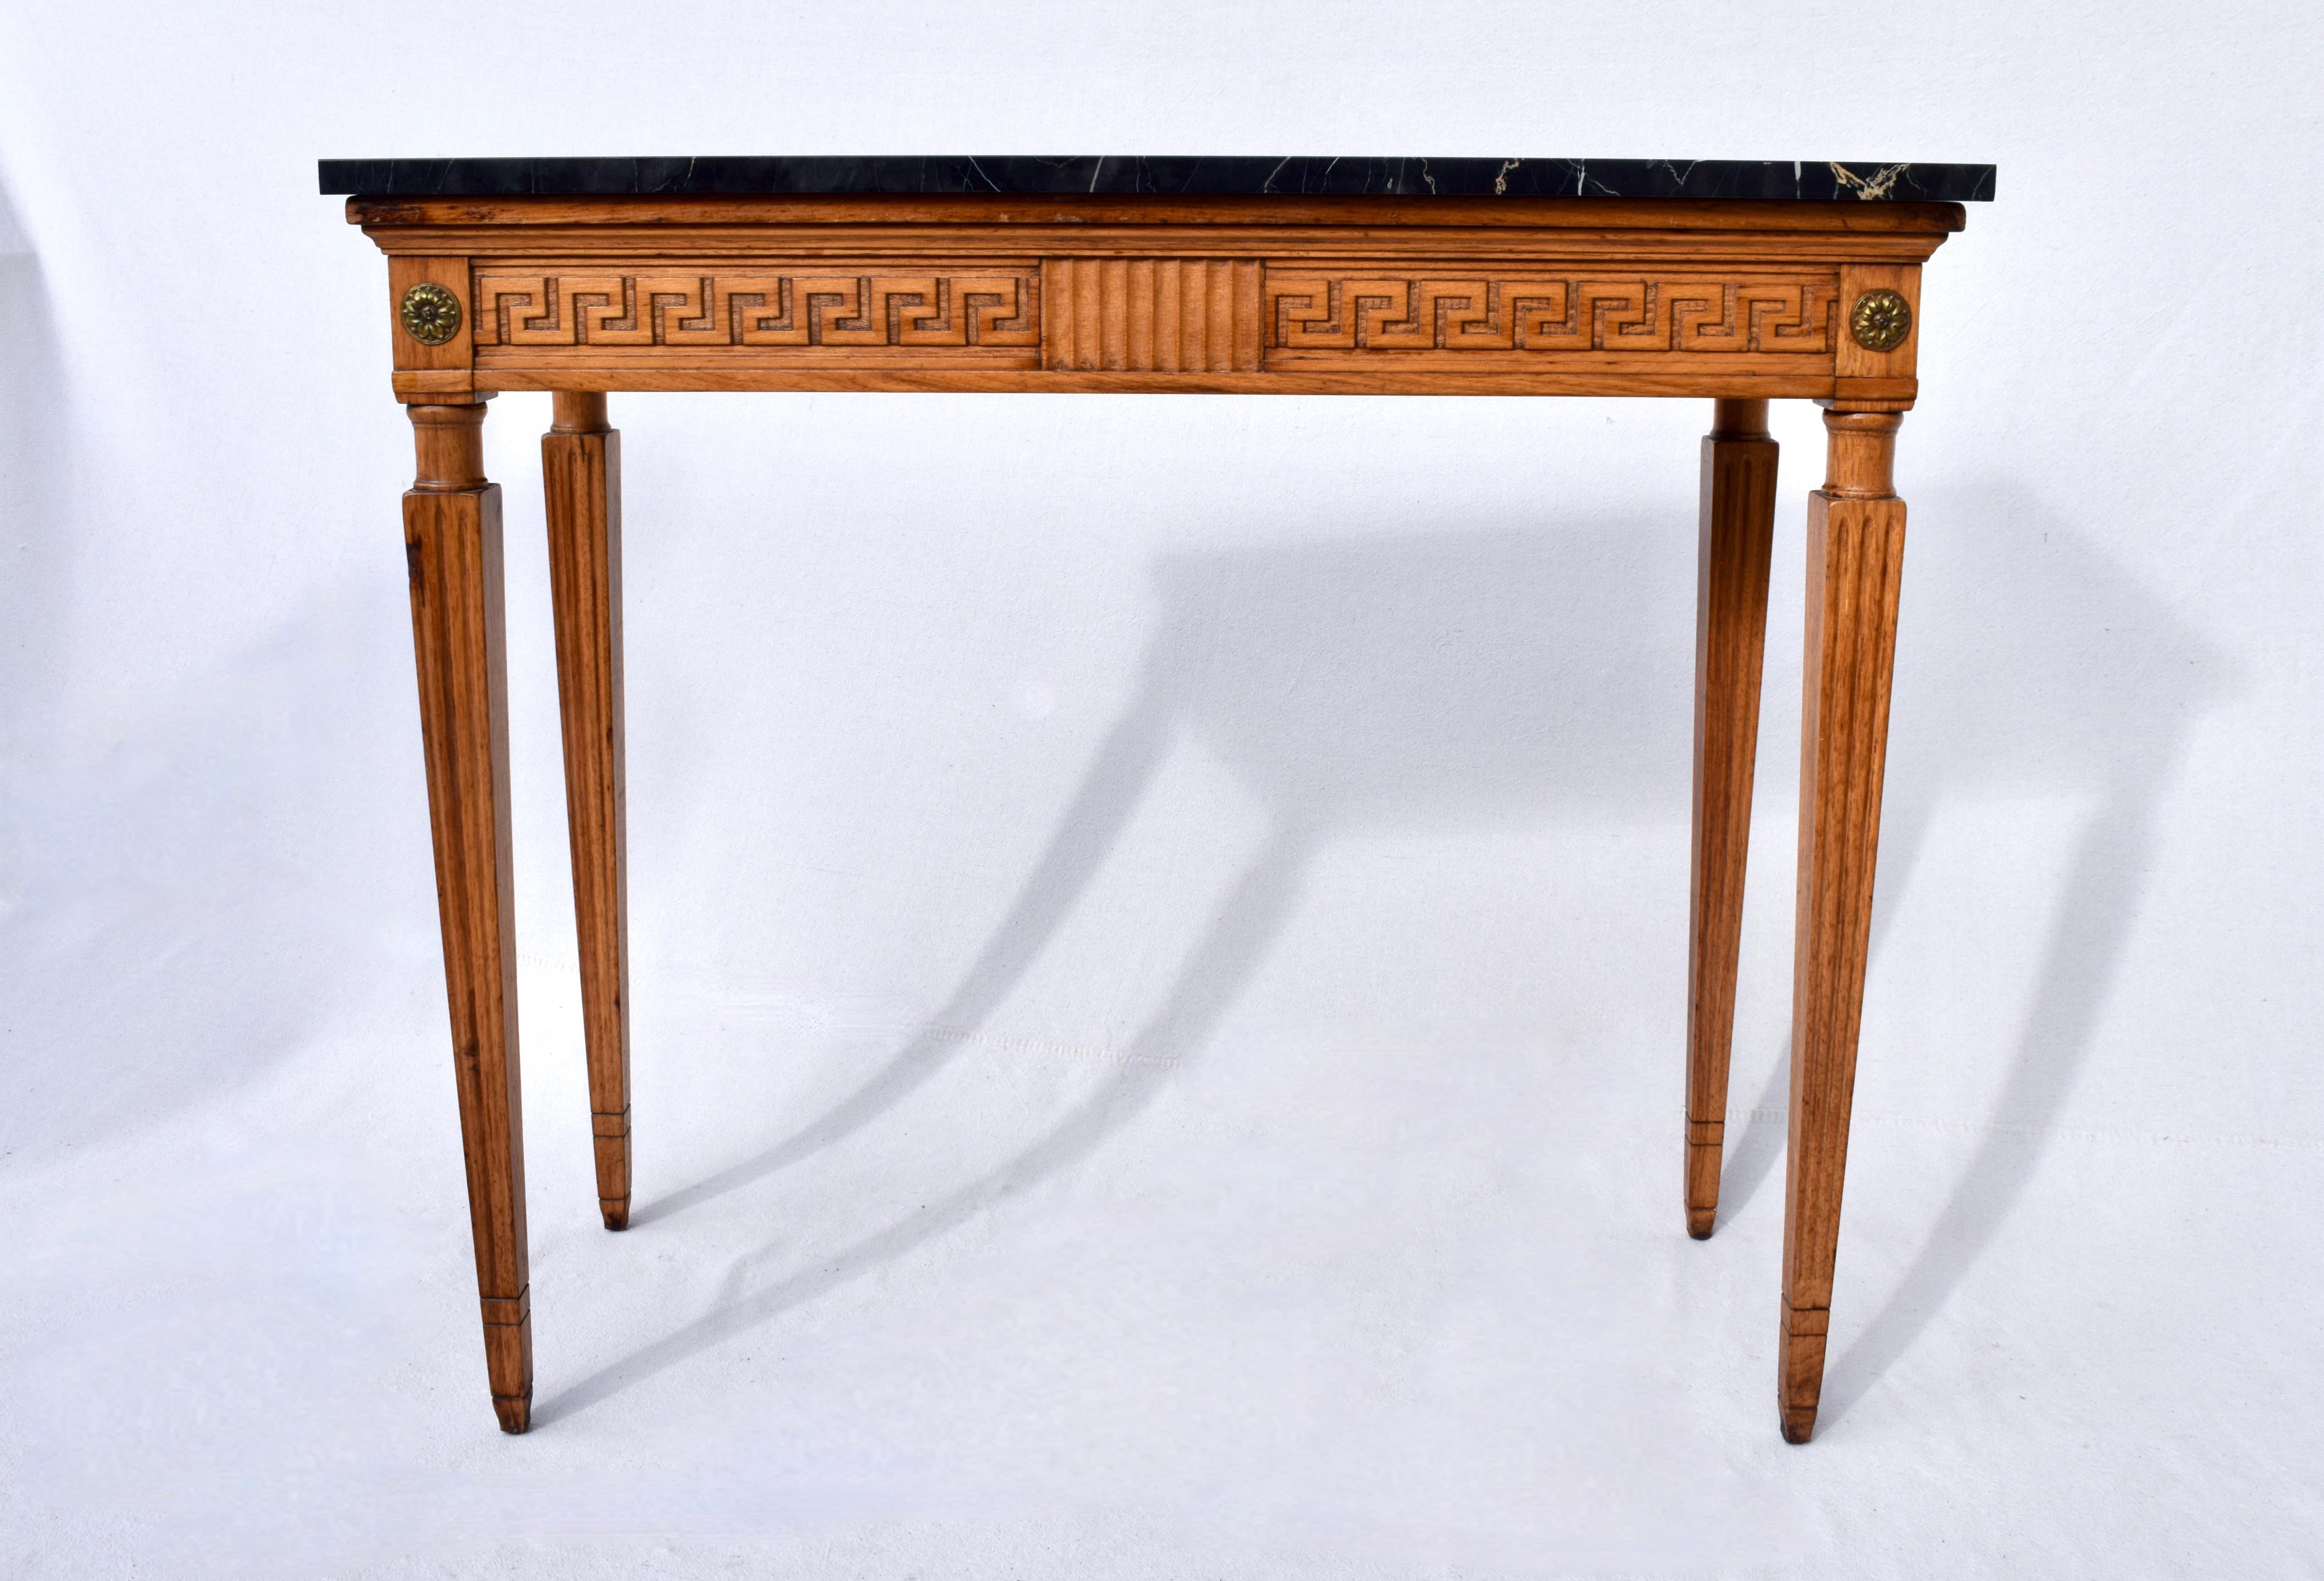 Italian Portoro marble top Louis XVI style console table with oak base featuring Greek key styling, tapered carved reed legs accented with brass rosettes. Exquisite lithe lines with removable top suitable for placement in a variety of settings.